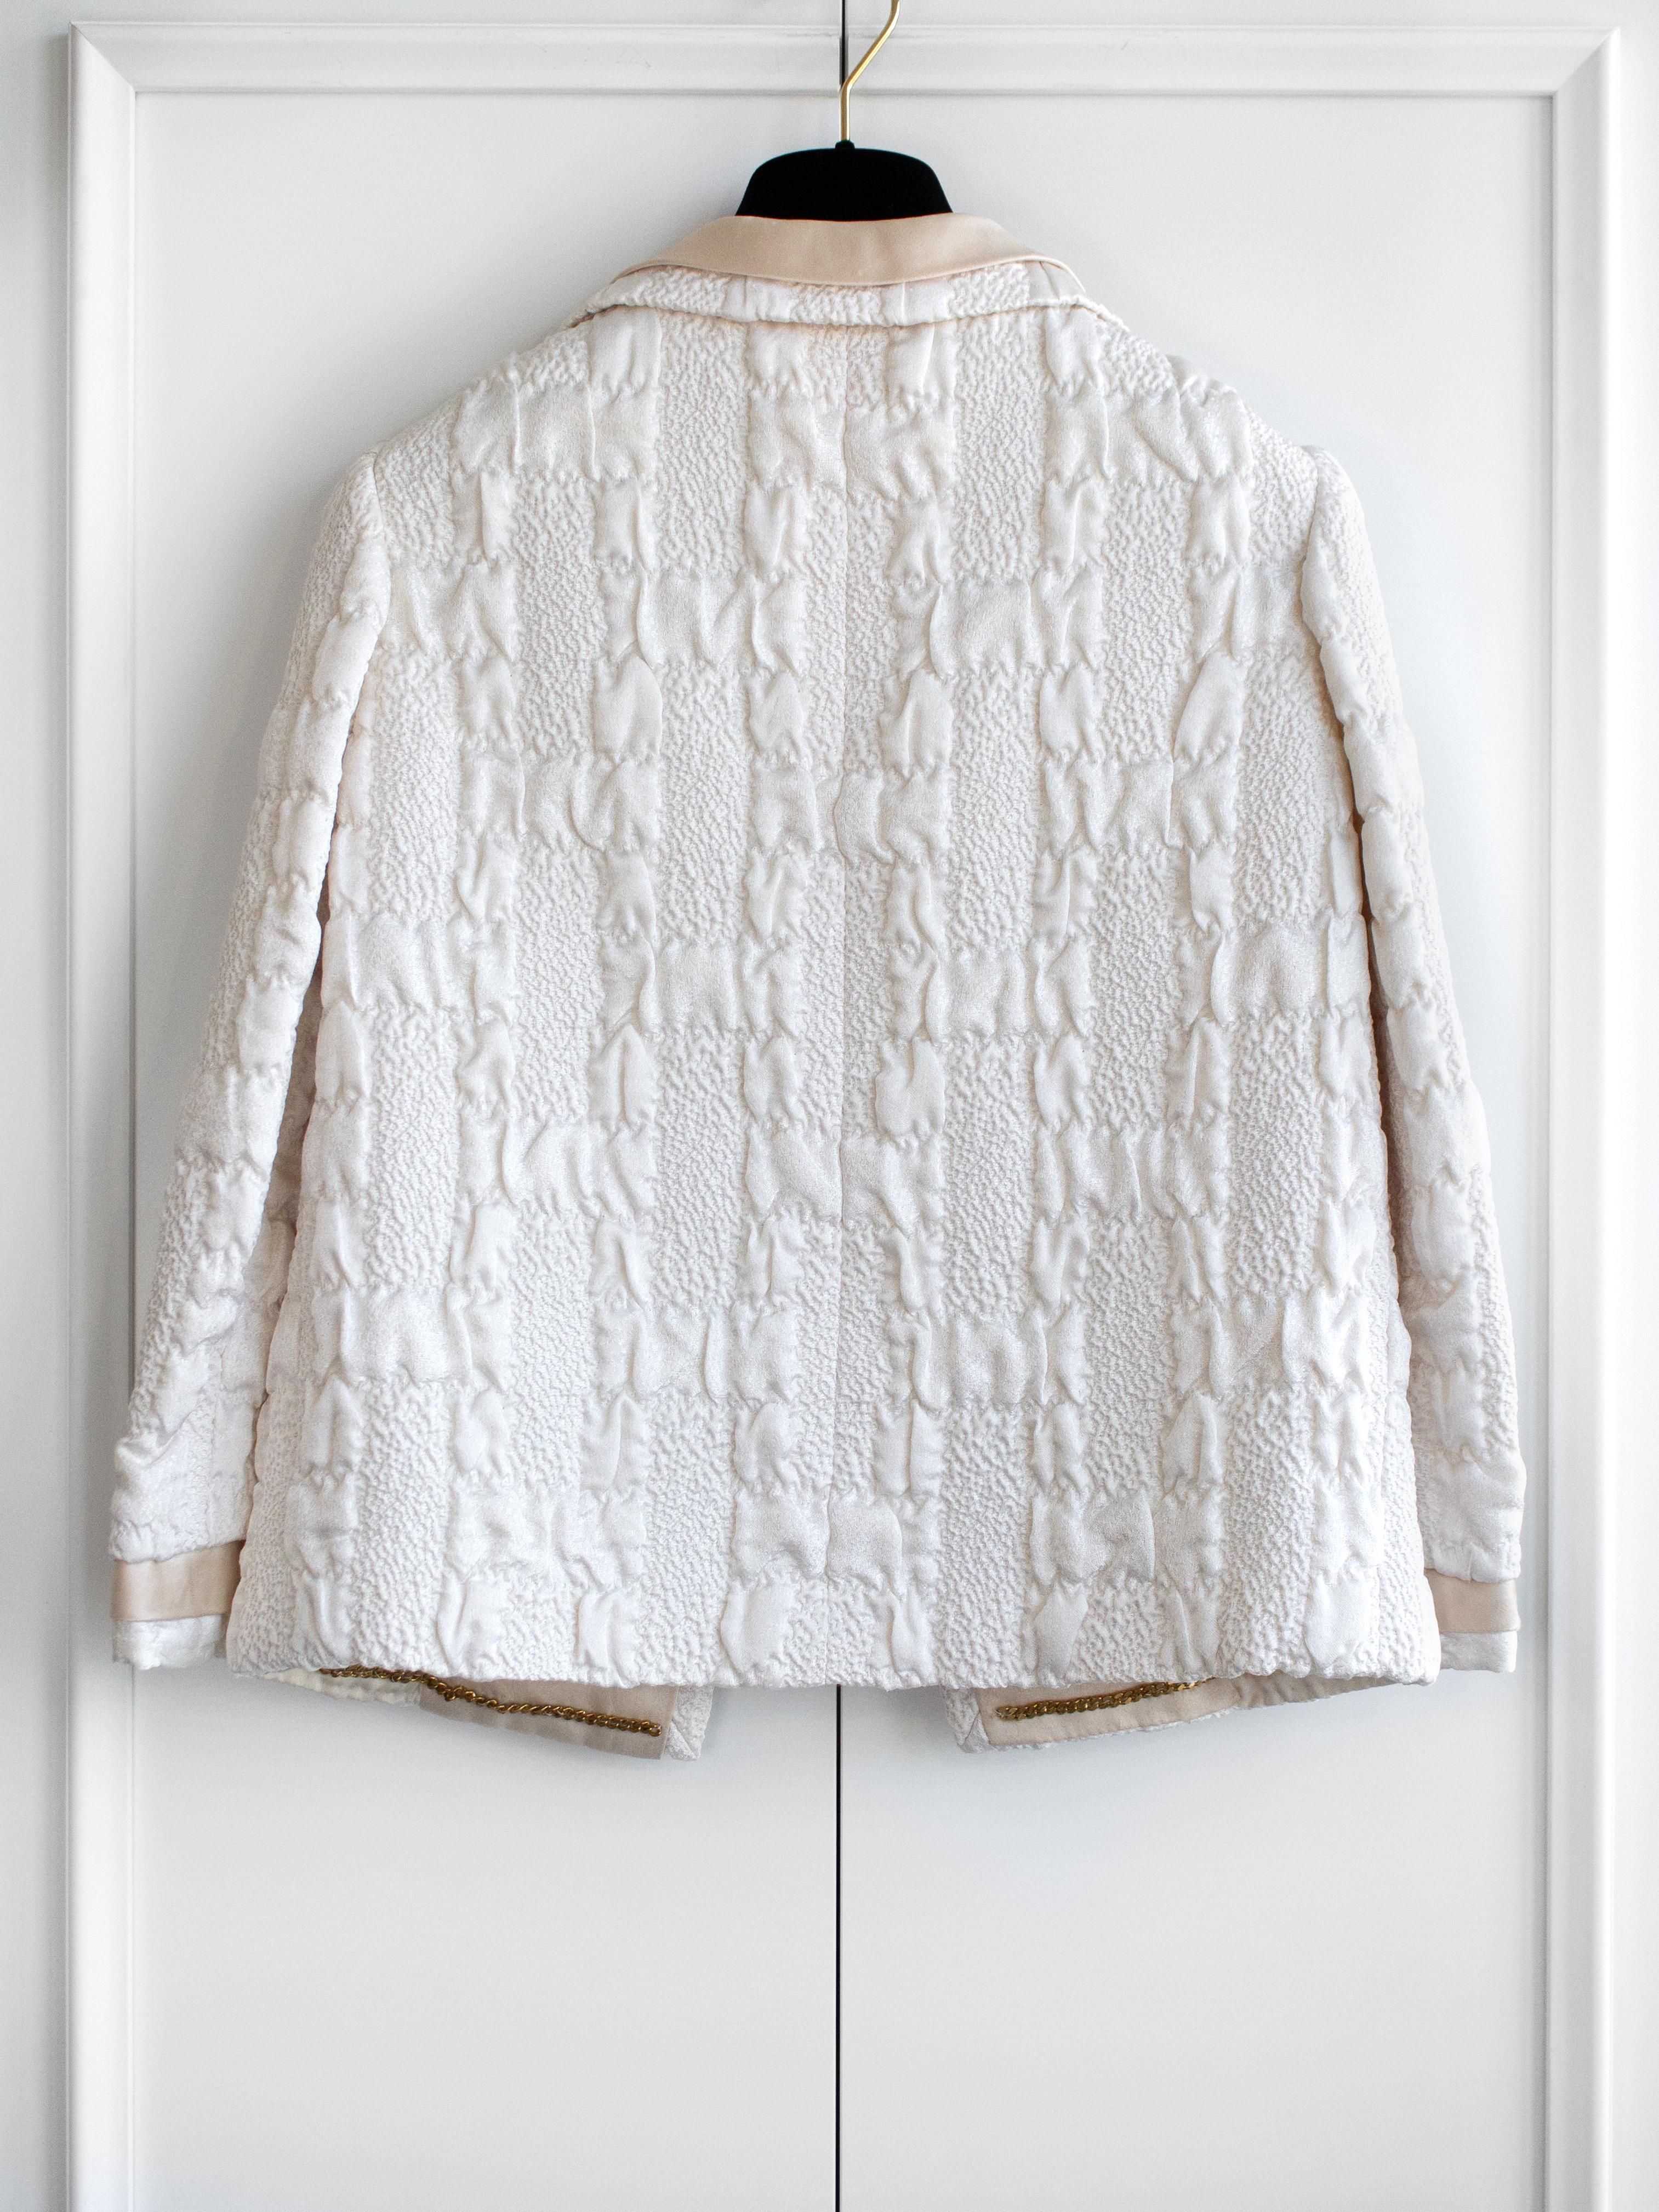 Documented Chanel Vintage Haute Couture 1965 White Cream Textured Silk Jacket In Good Condition For Sale In Jersey City, NJ